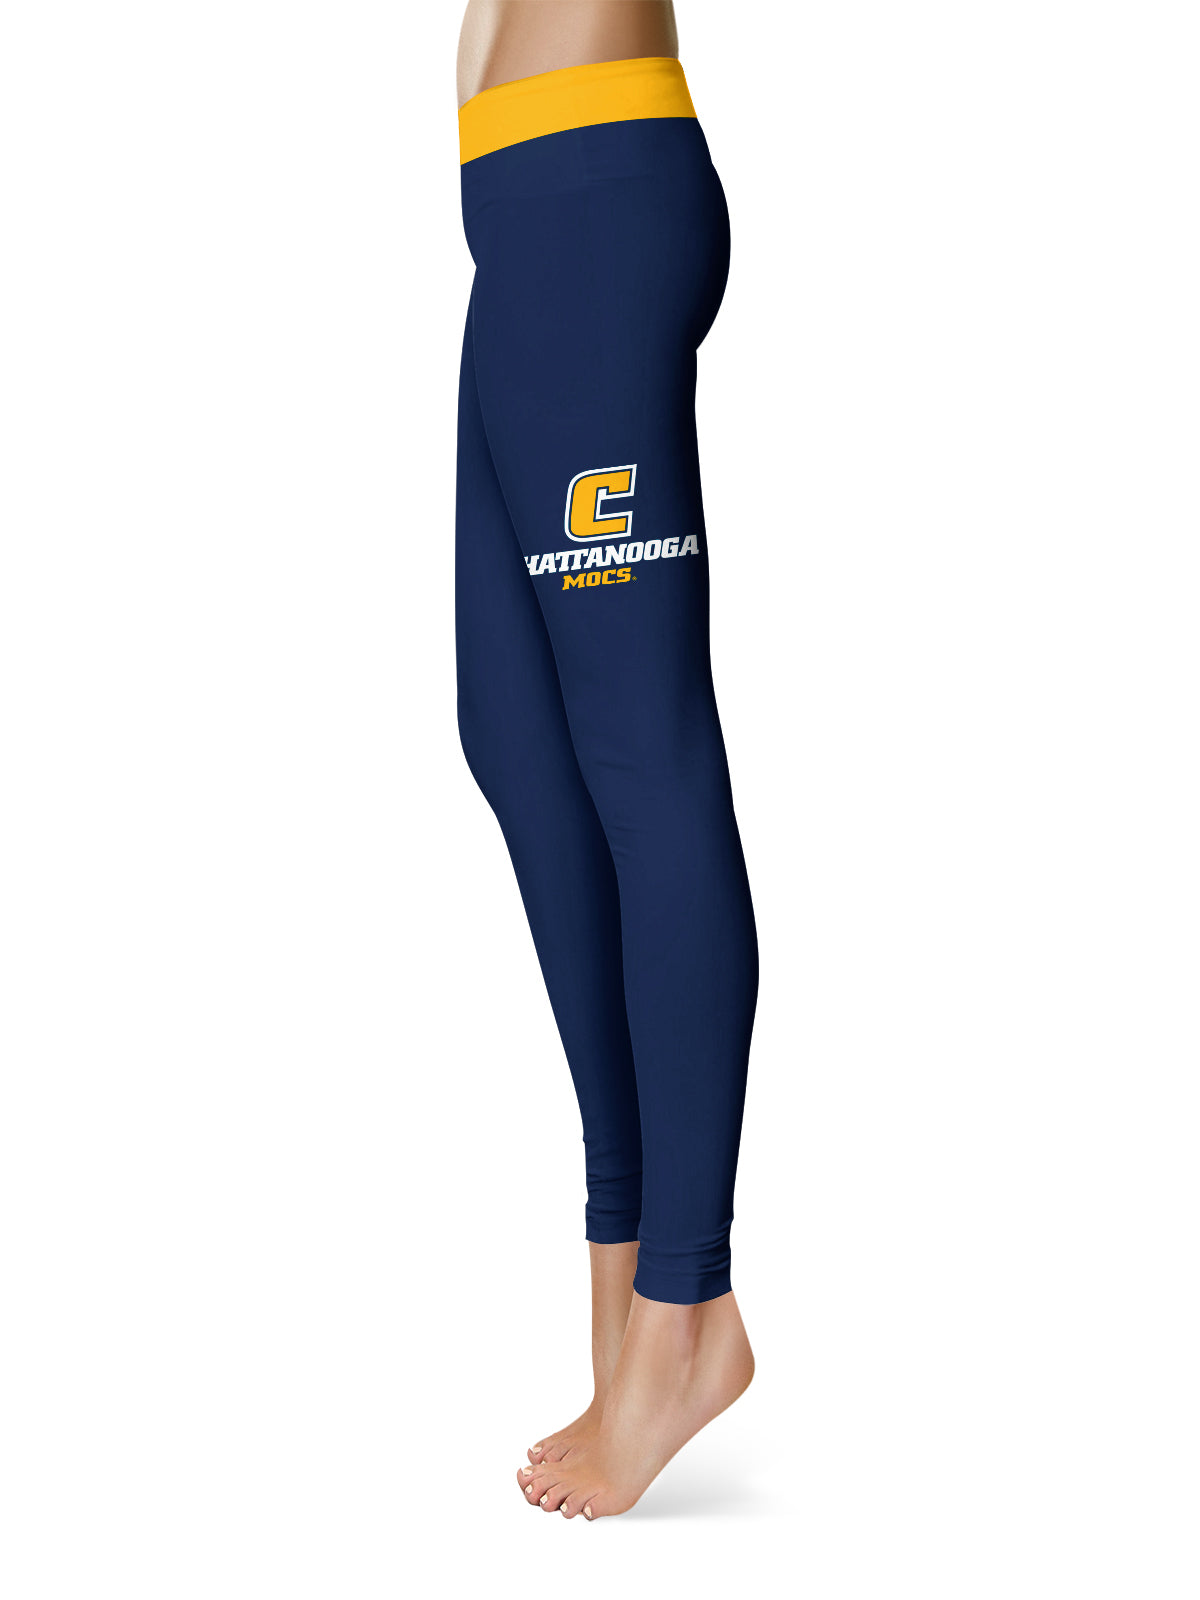 Tennessee Chattanooga MOCS Vive La Fete Game Day Collegiate Logo on Thigh Blue Women Yoga Leggings 2.5 Waist Tights